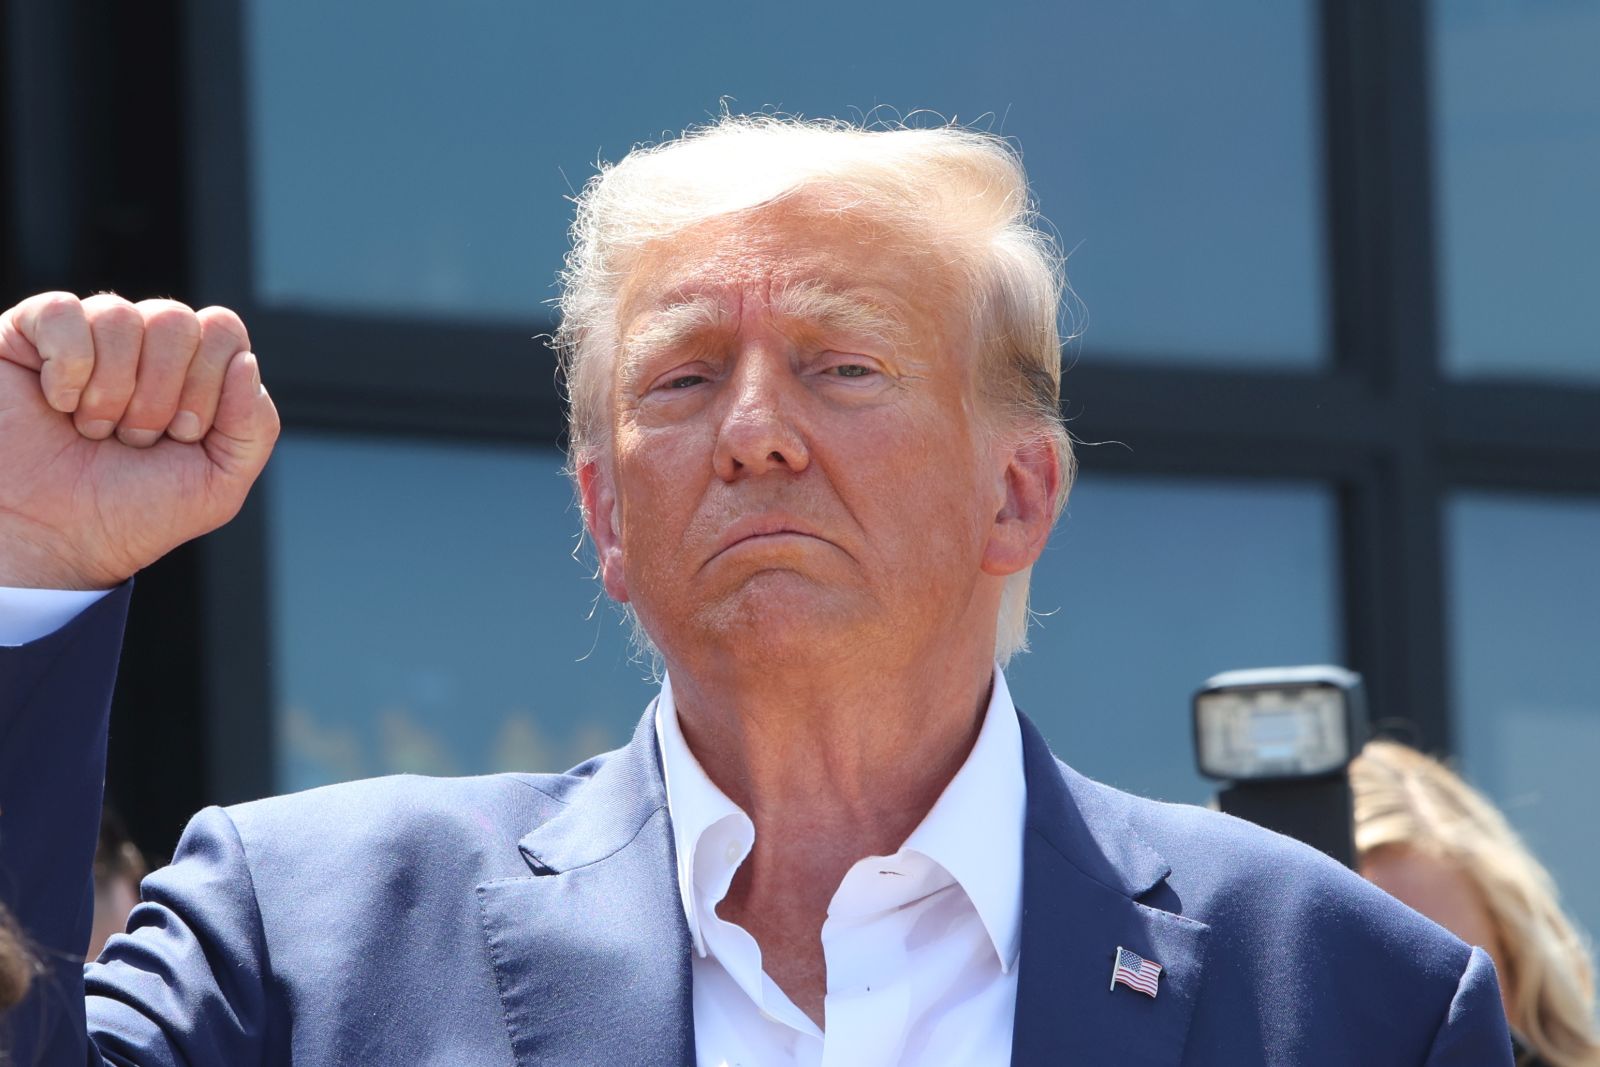 epa10797976 Former US President Donald J. Trump attends the Iowa State Fair in Des Moines, Iowa, USA, 12 August 2023. Trump is campaigning ahead of the 2024 US presidential election.  EPA/ALEX WROBLEWSKI